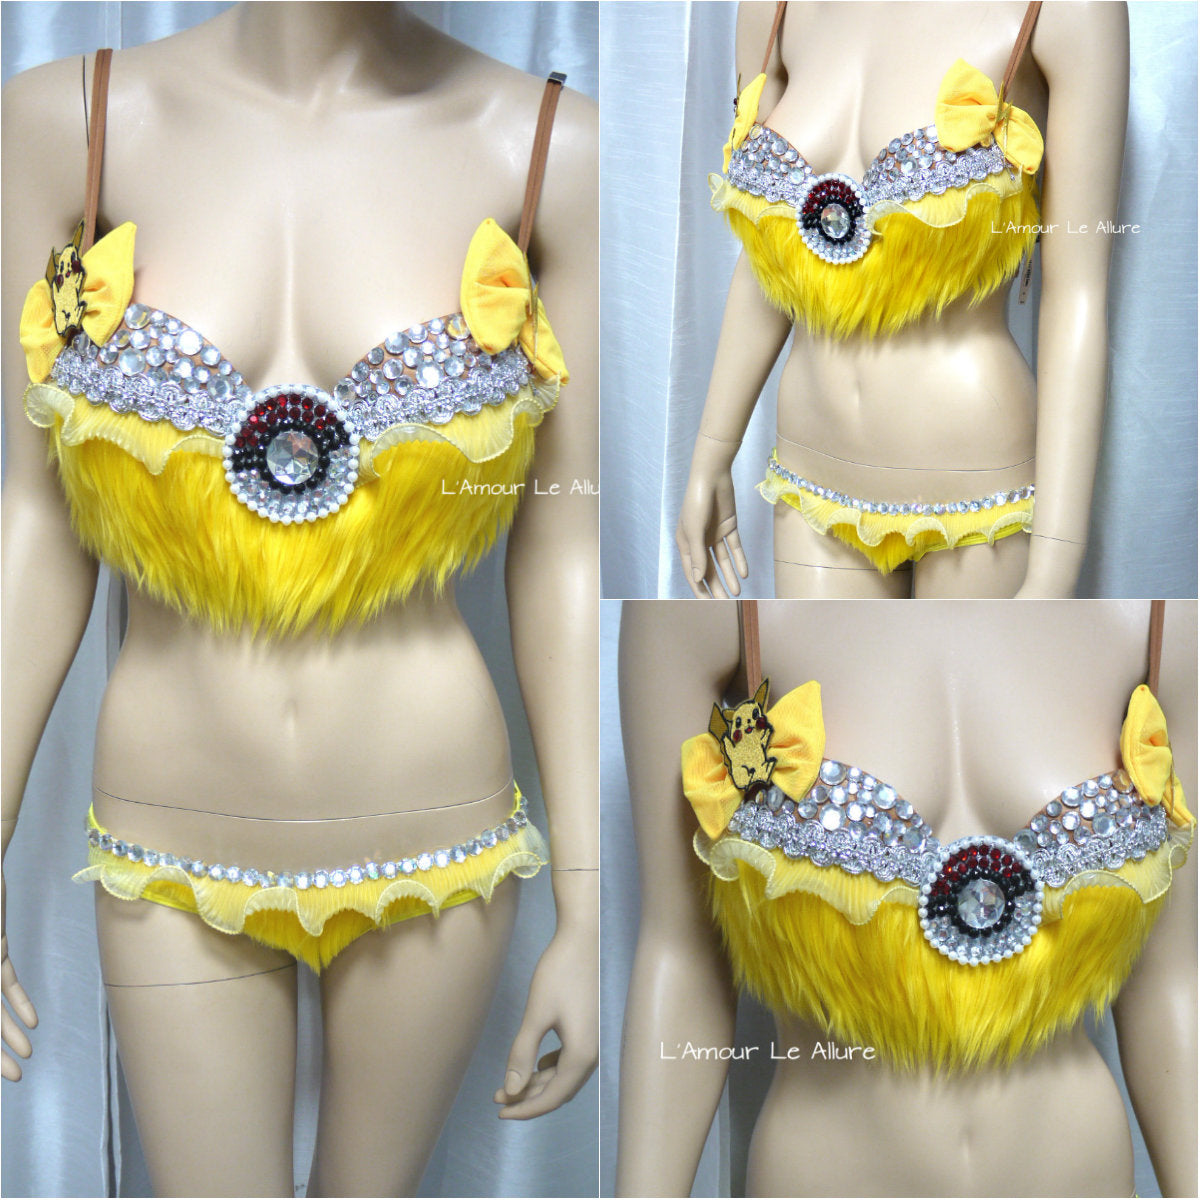 Pikachu Fur Bra and Bottom Cosplay Dance Costume Rave Halloween – L'Amour  Le Allure